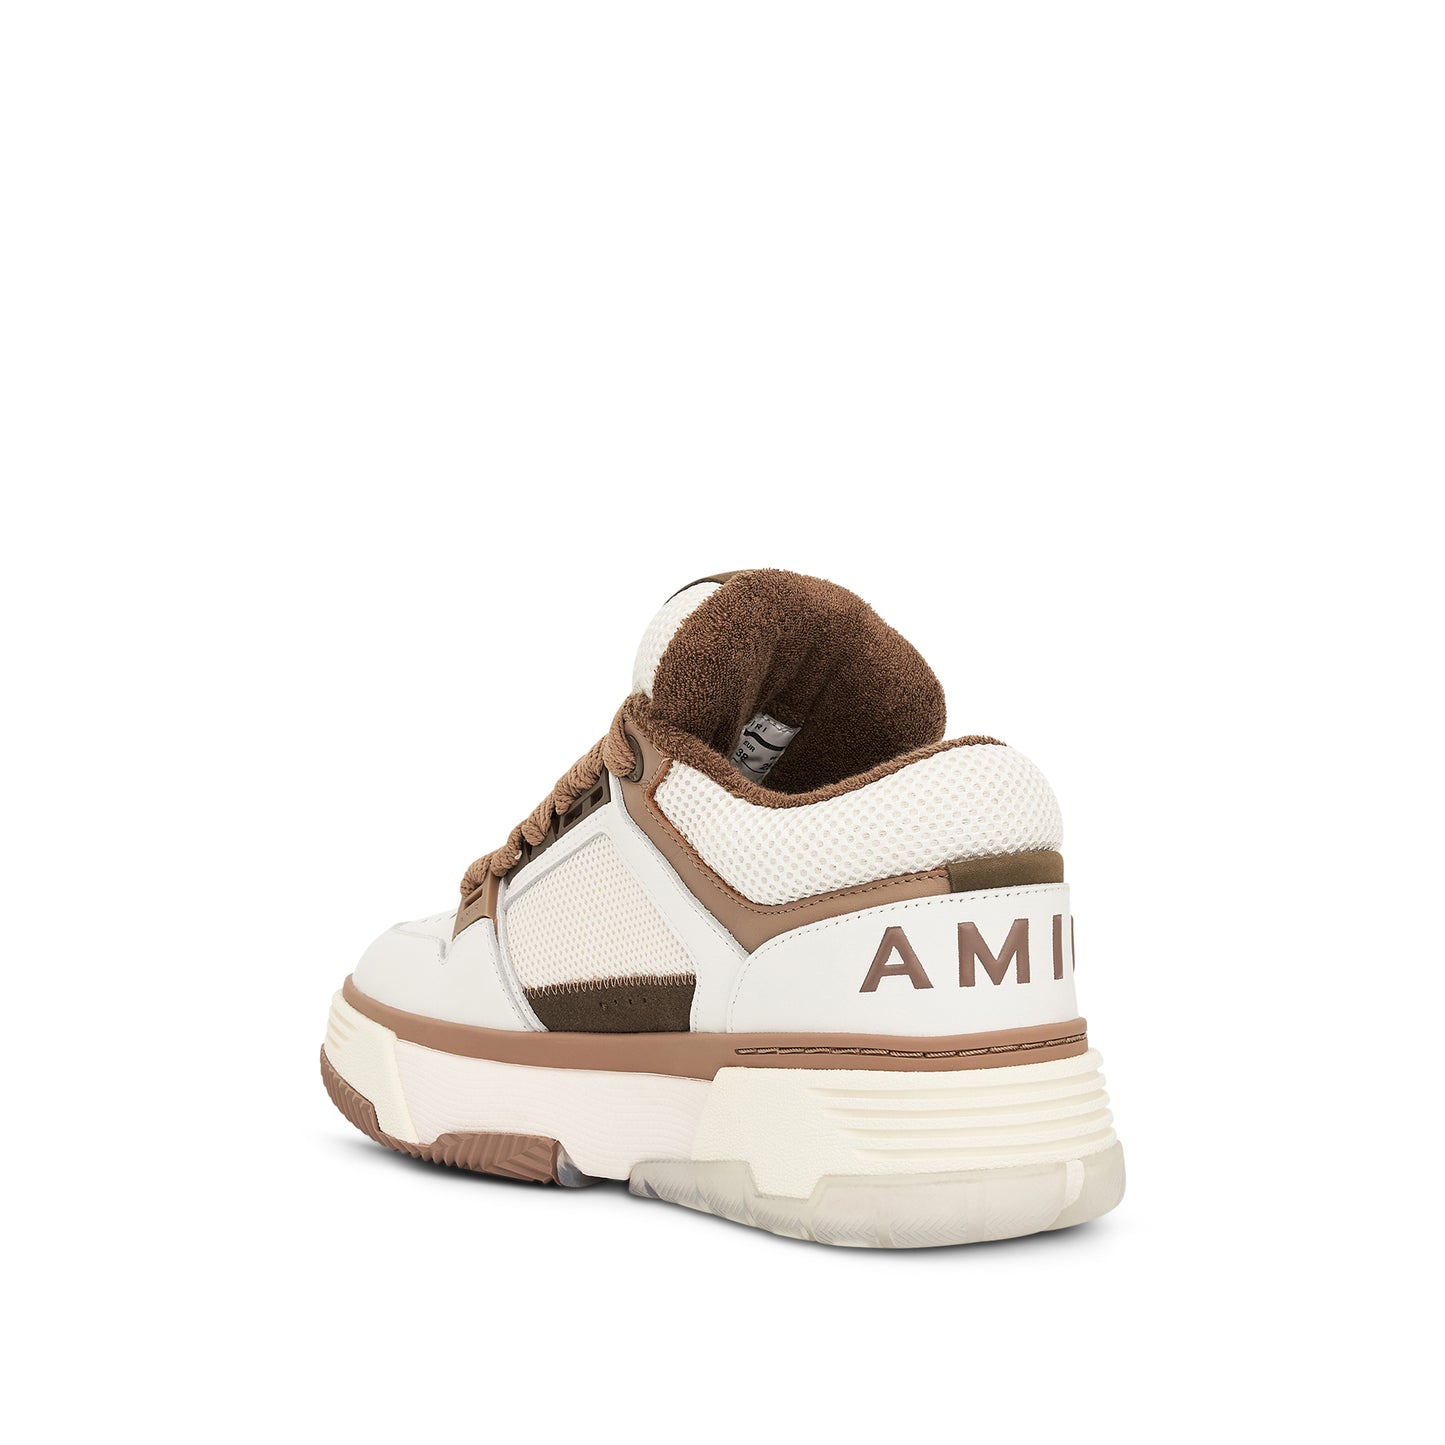 MA 1 Sneakers in White/Brown